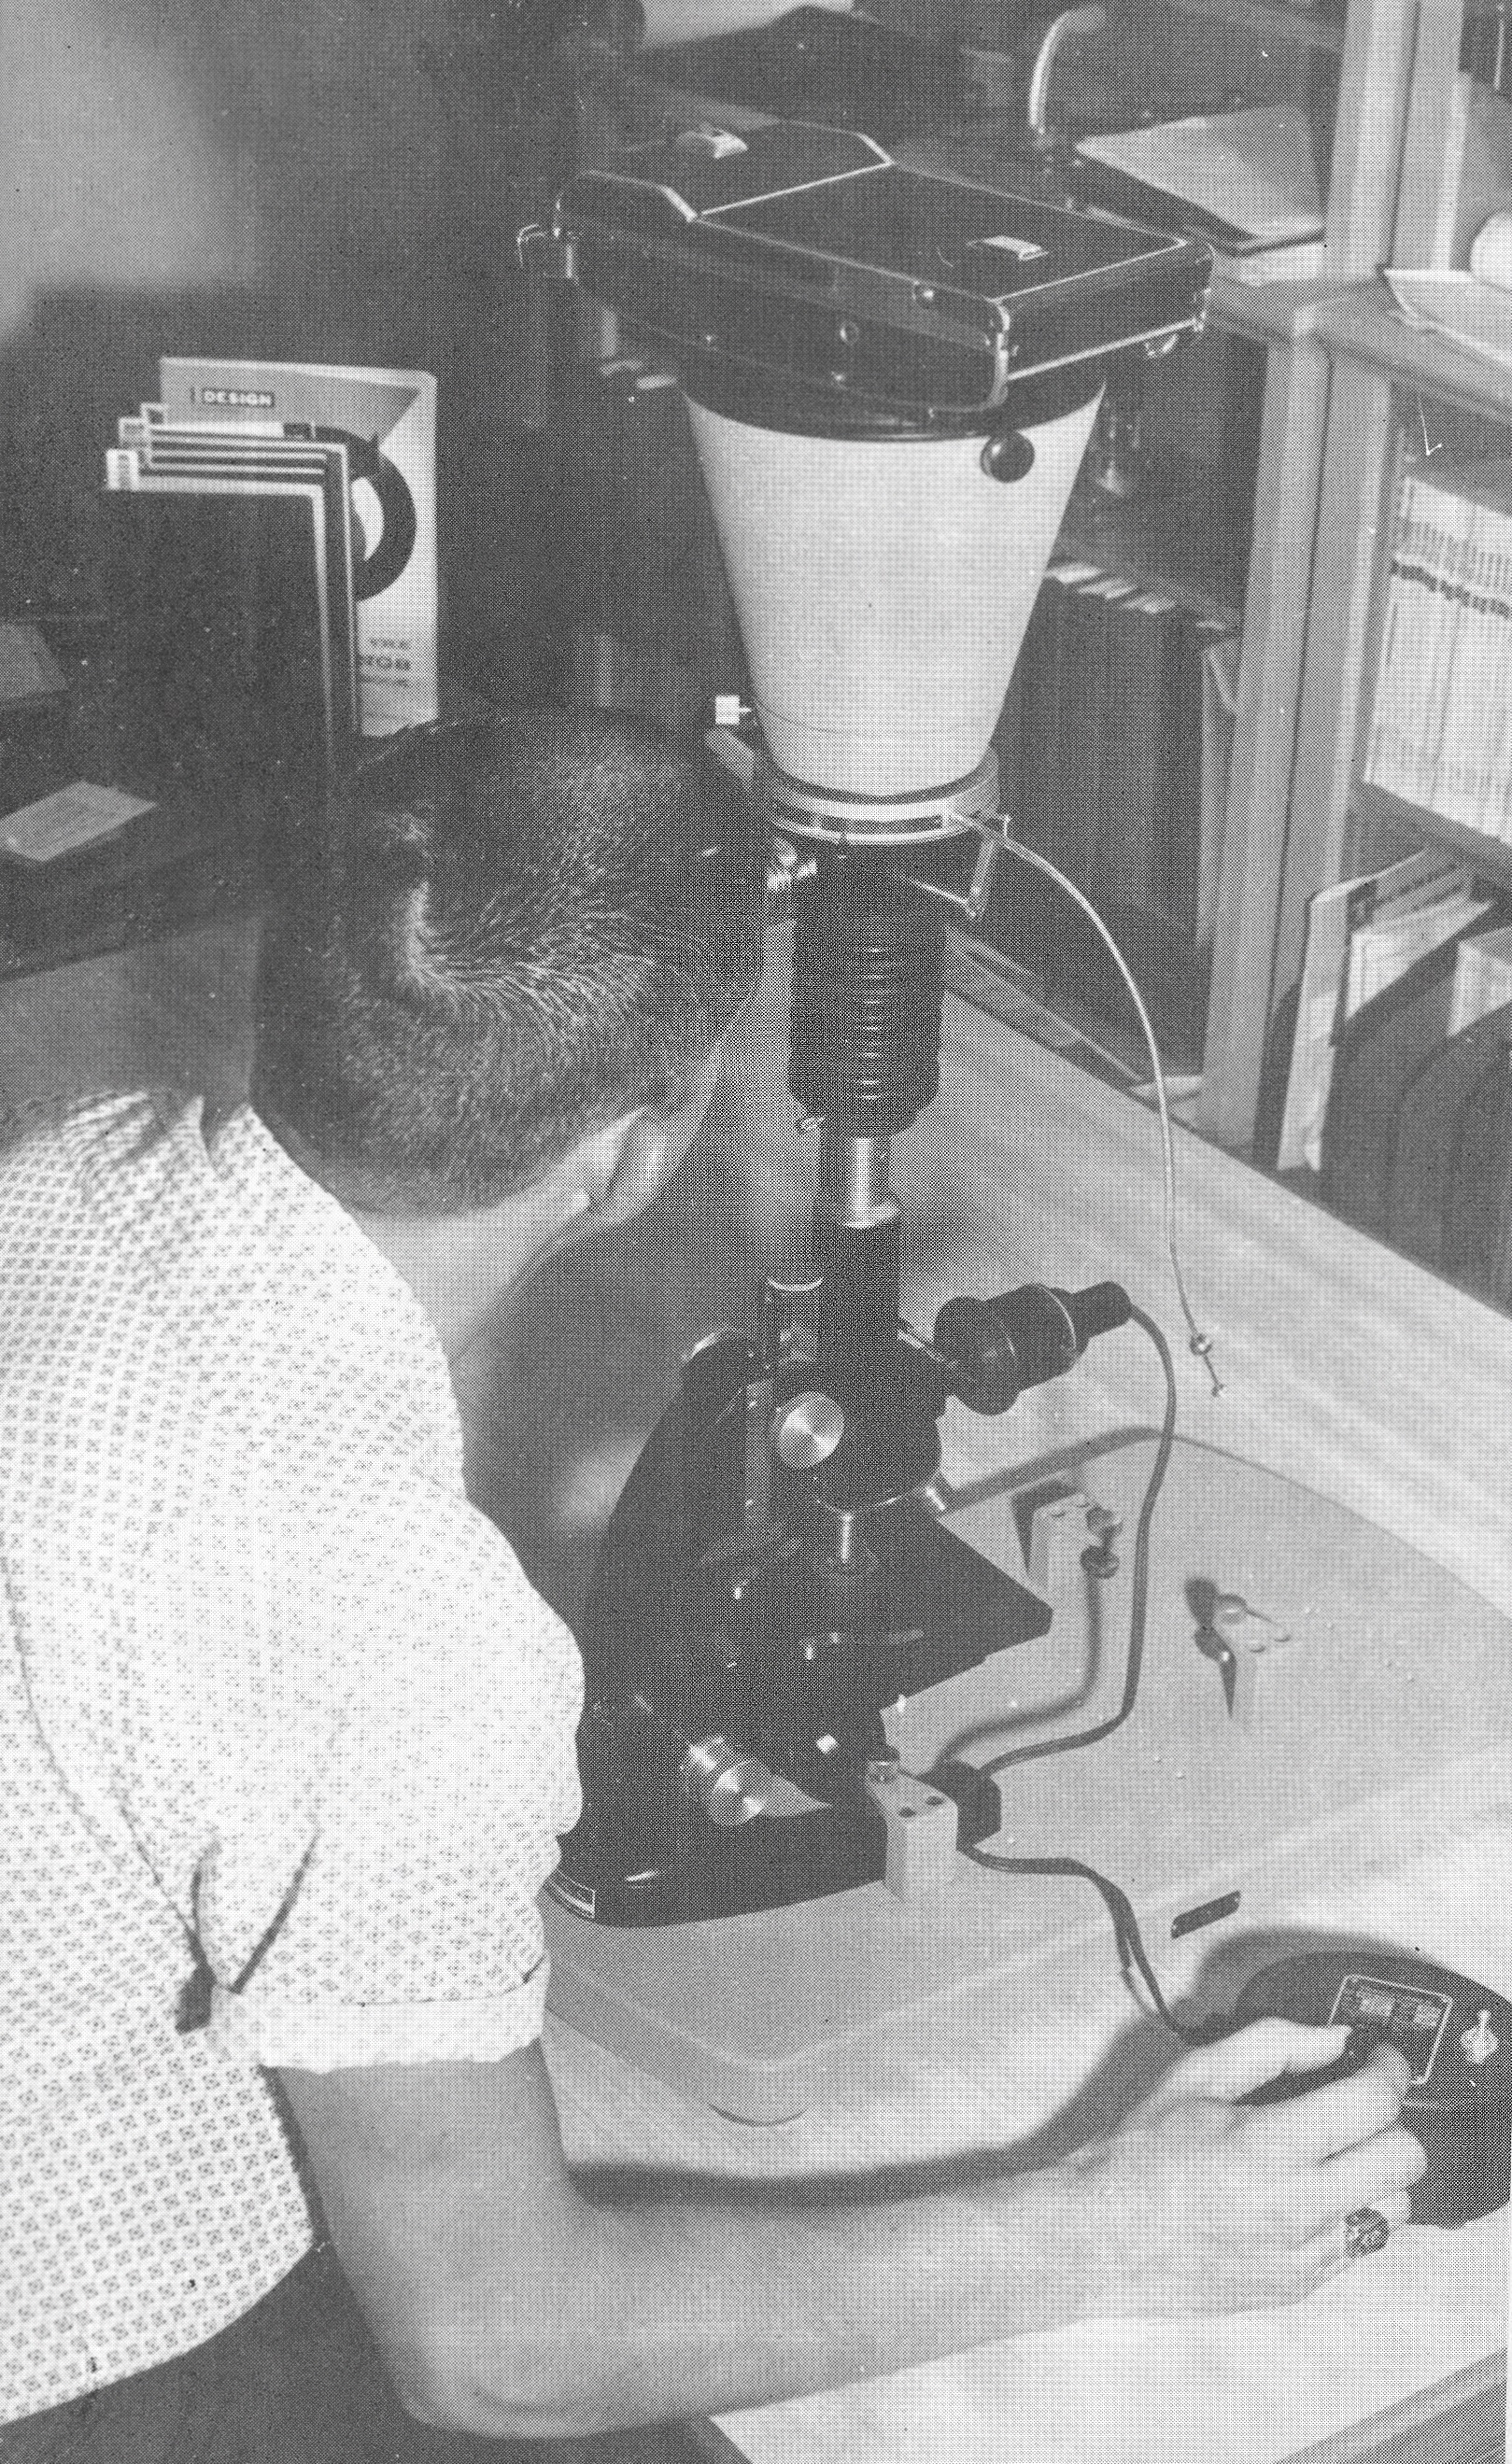 The microscopes of 1963 were not quite as advanced as the machines used in Delta's modern electron microscopy program, the only program of its kind at a community college in the U.S.